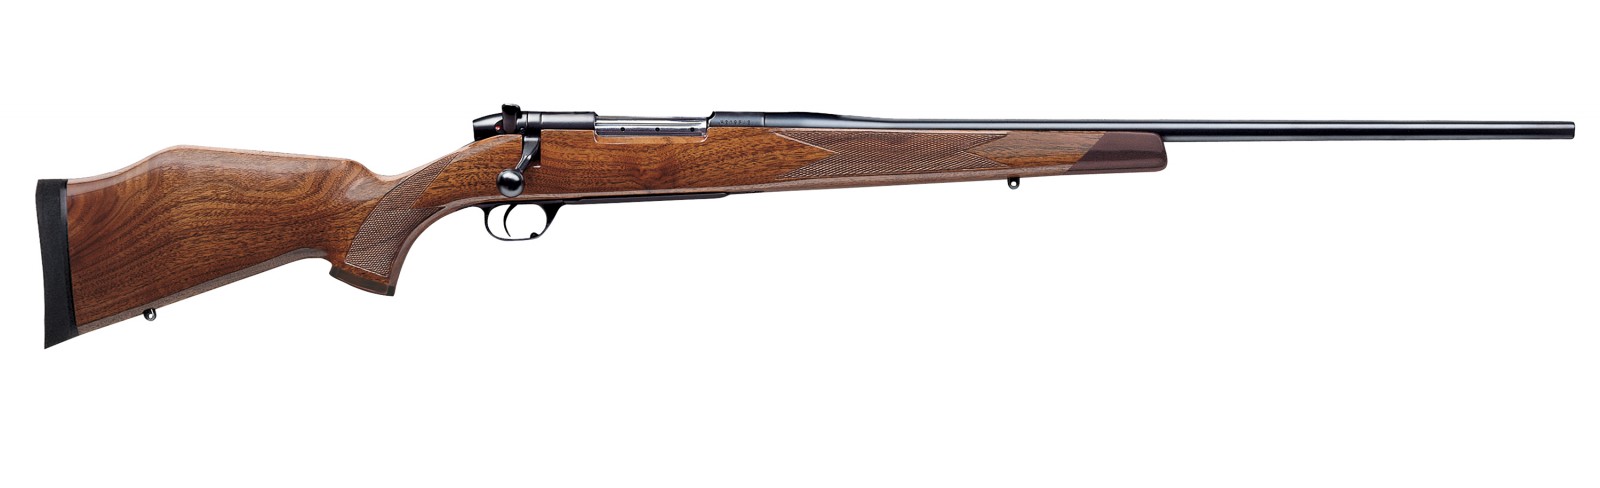 Current model Weatherby Mark V® Sporter centerfire rifle. (Picture courtesy Weatherby).